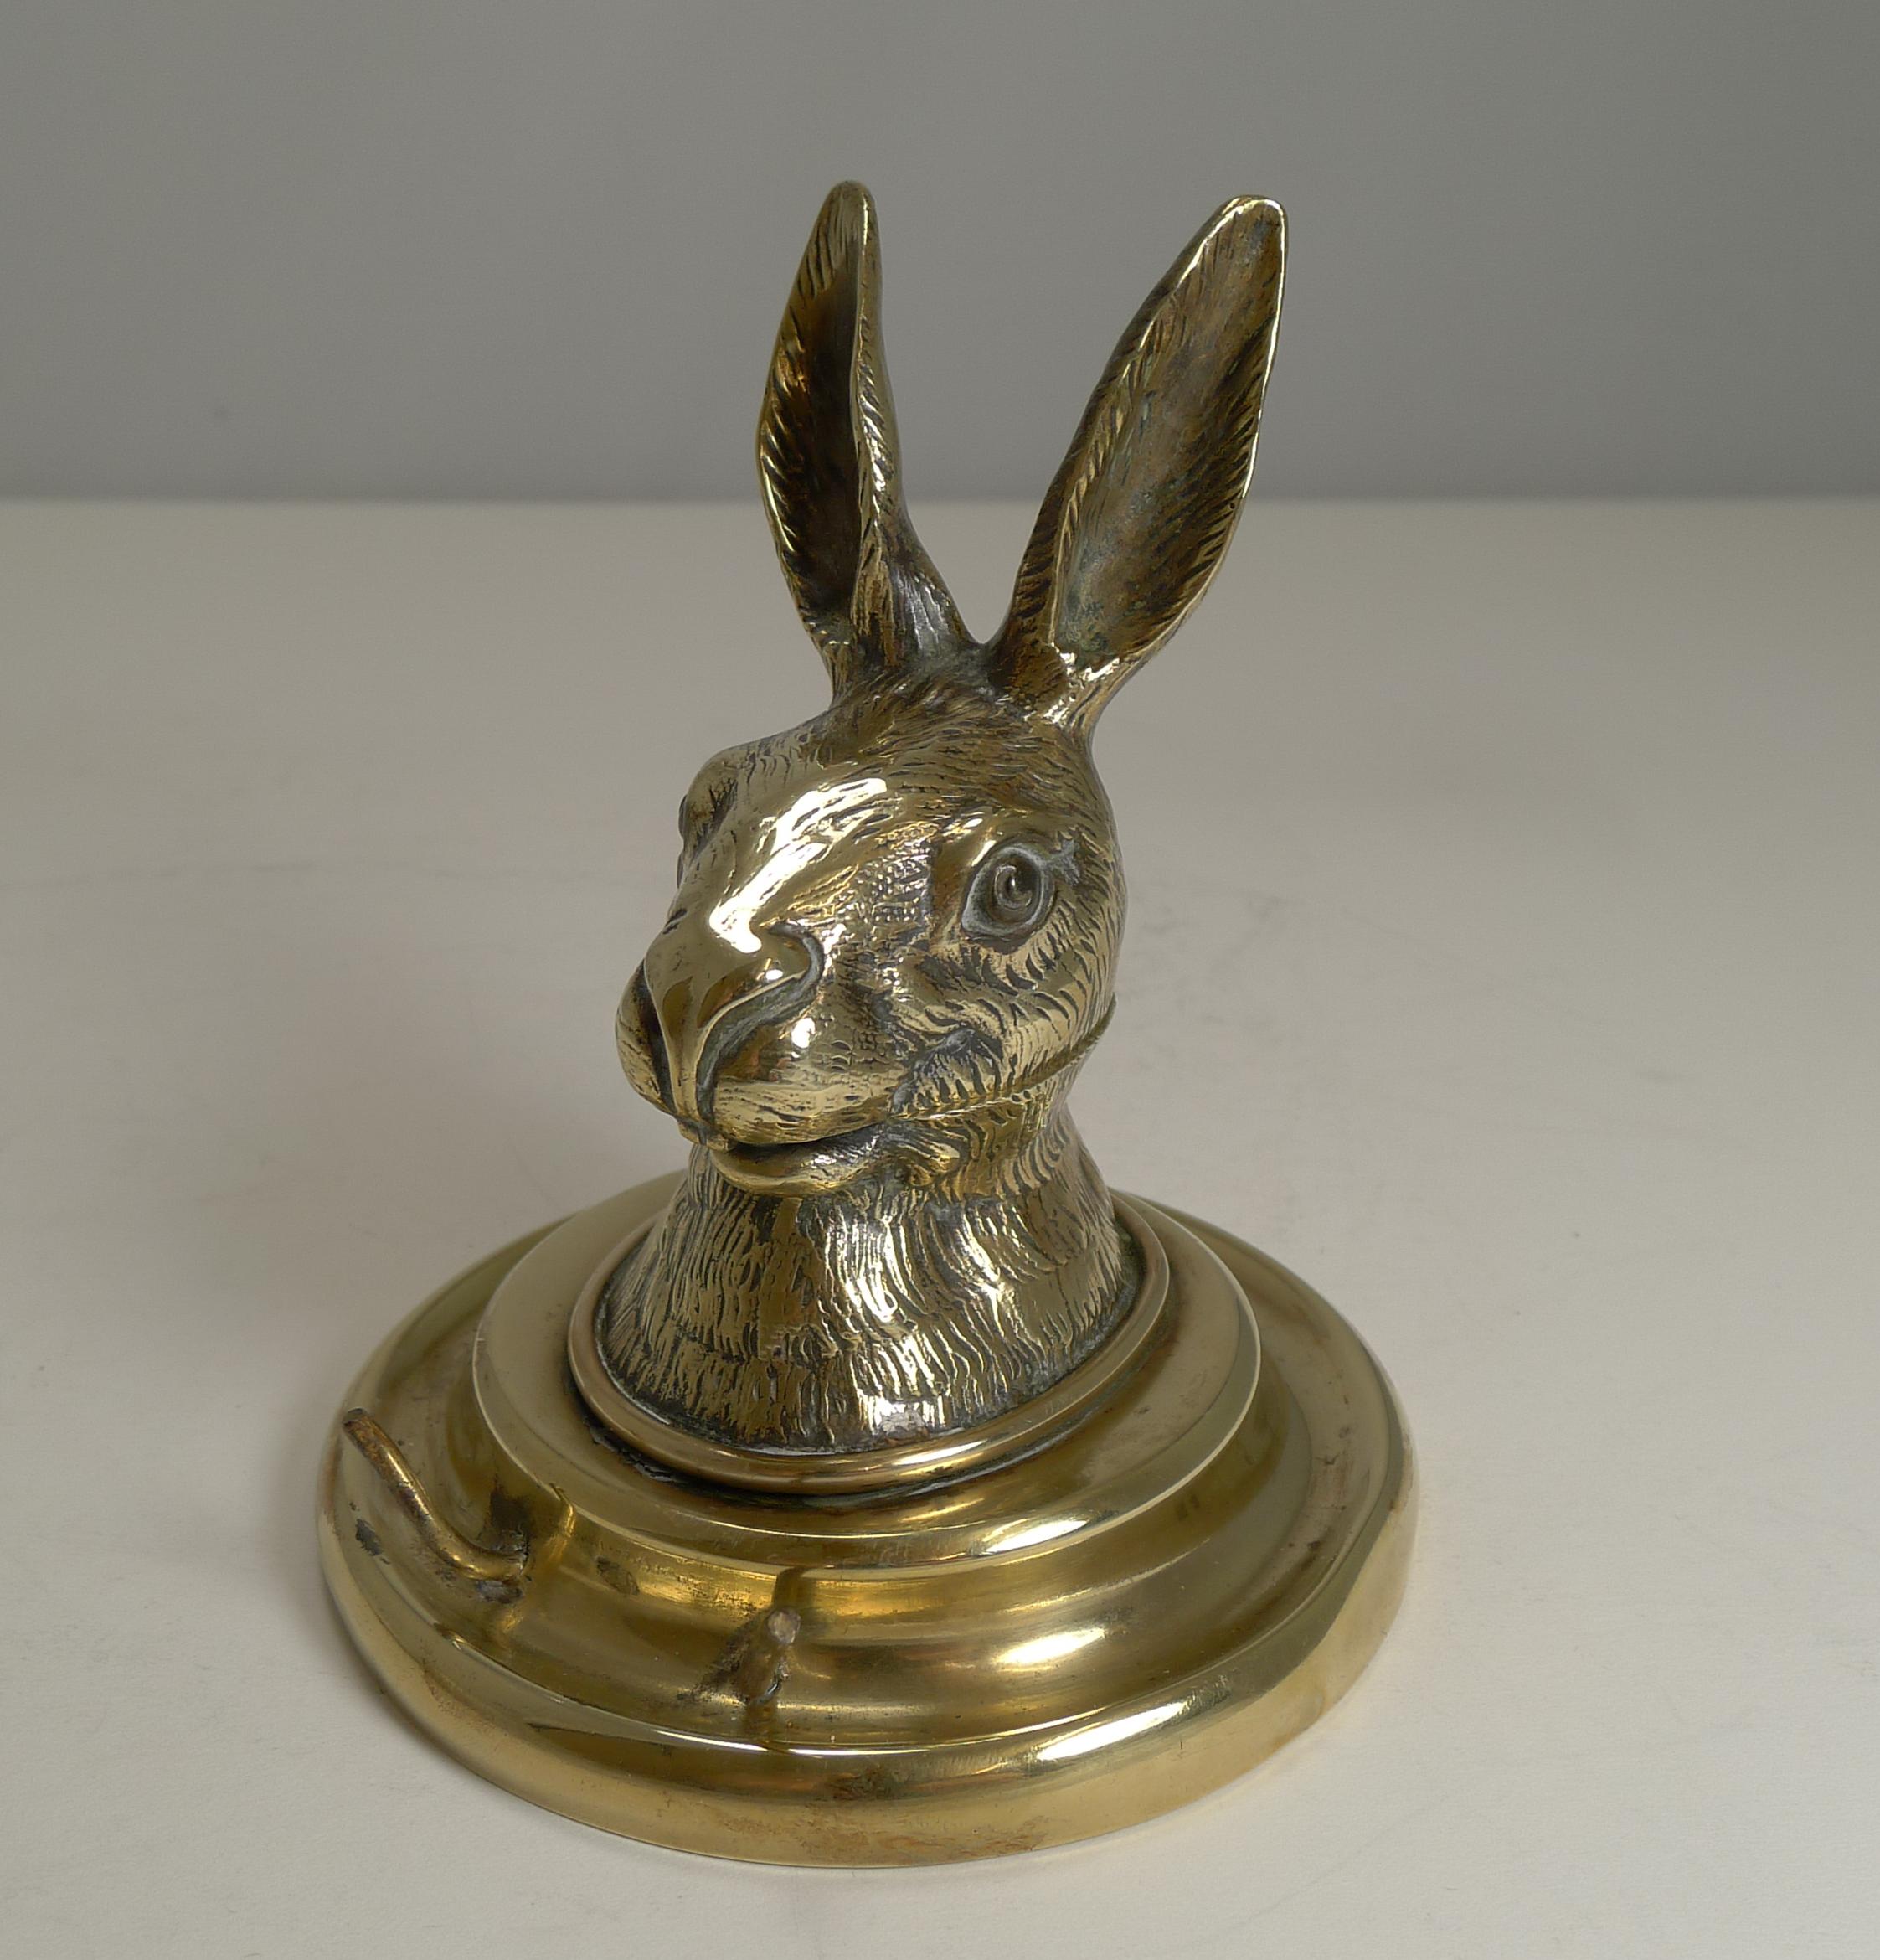 Antique English Novelty / Figural Brass Inkwell - Hare c.1880 In Good Condition For Sale In Bath, GB